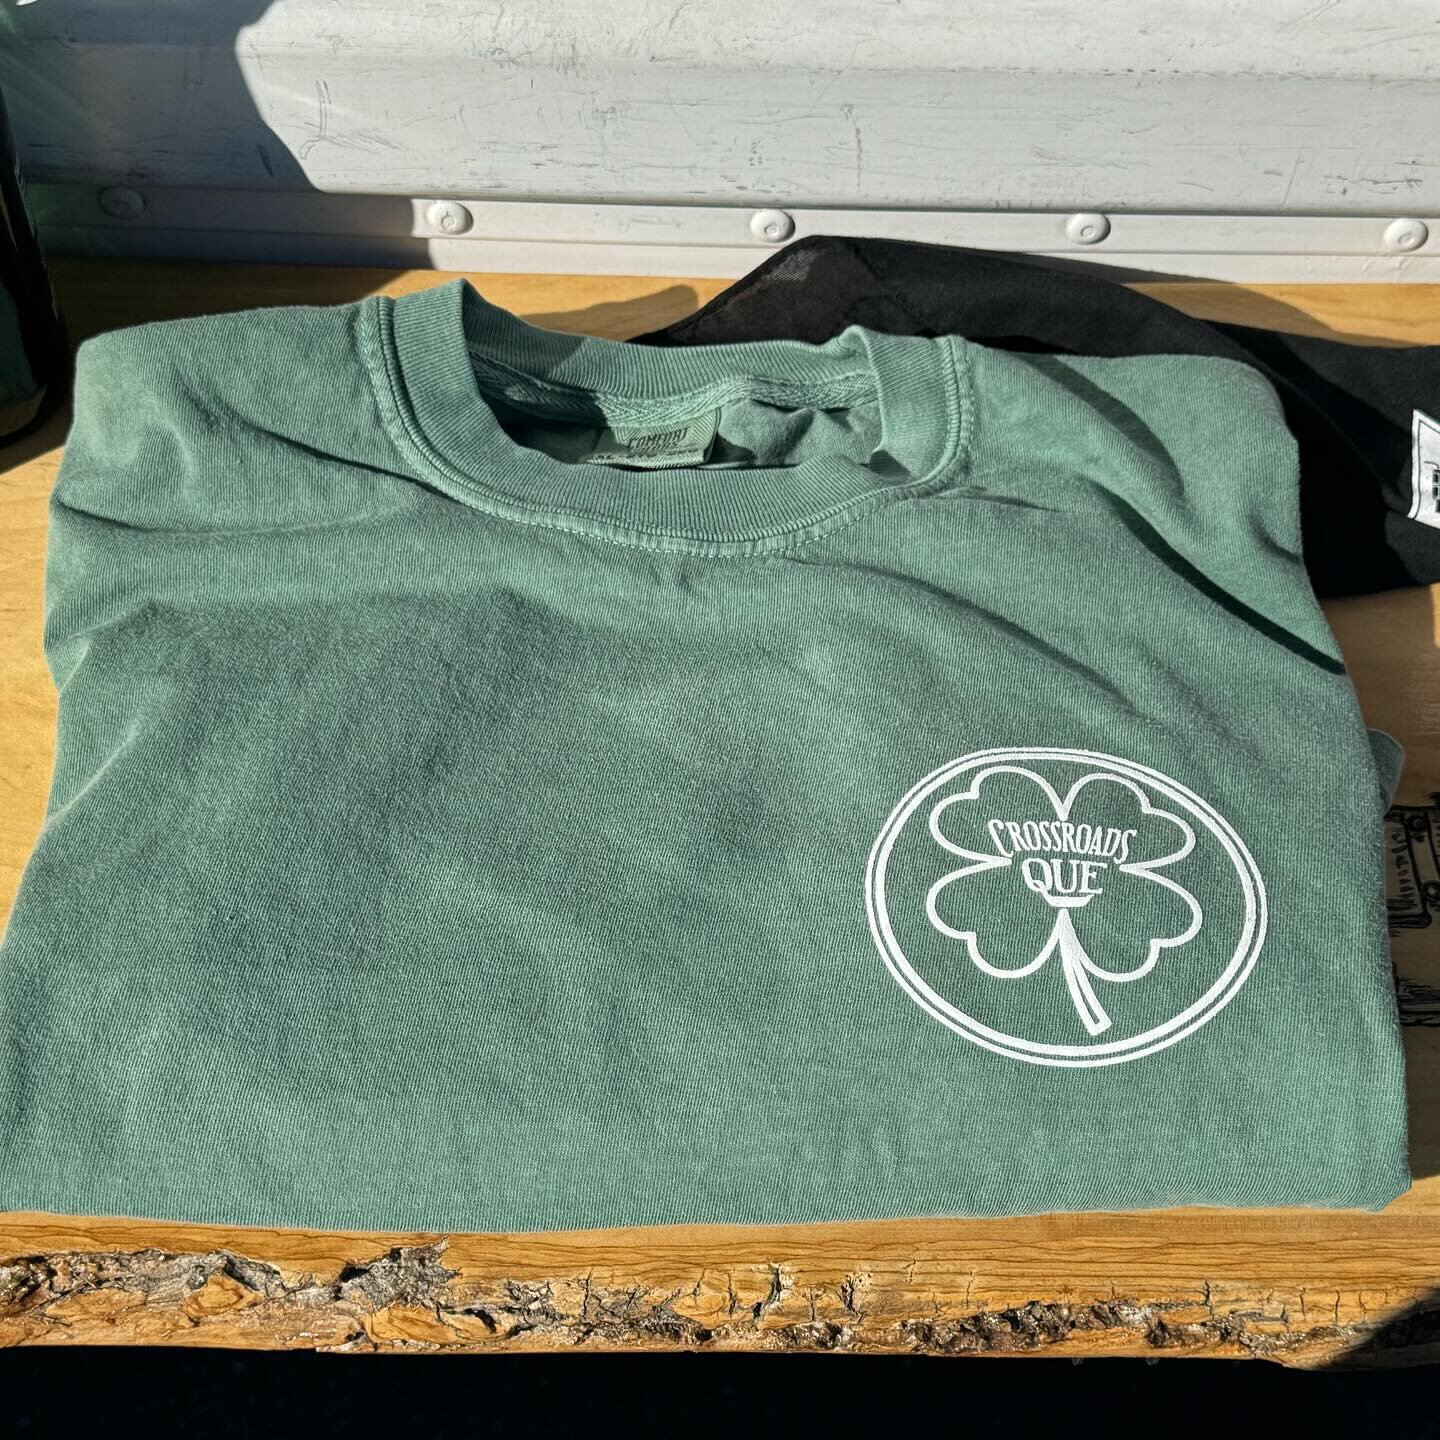 St. paddy&rsquo;s shirts have landed. Message us to reserve your shirt for parade day. While supplies last!
#stpaddysday #bayshore #crossroadsque #smokeonthewater #brisketking #shorethang #queclassic